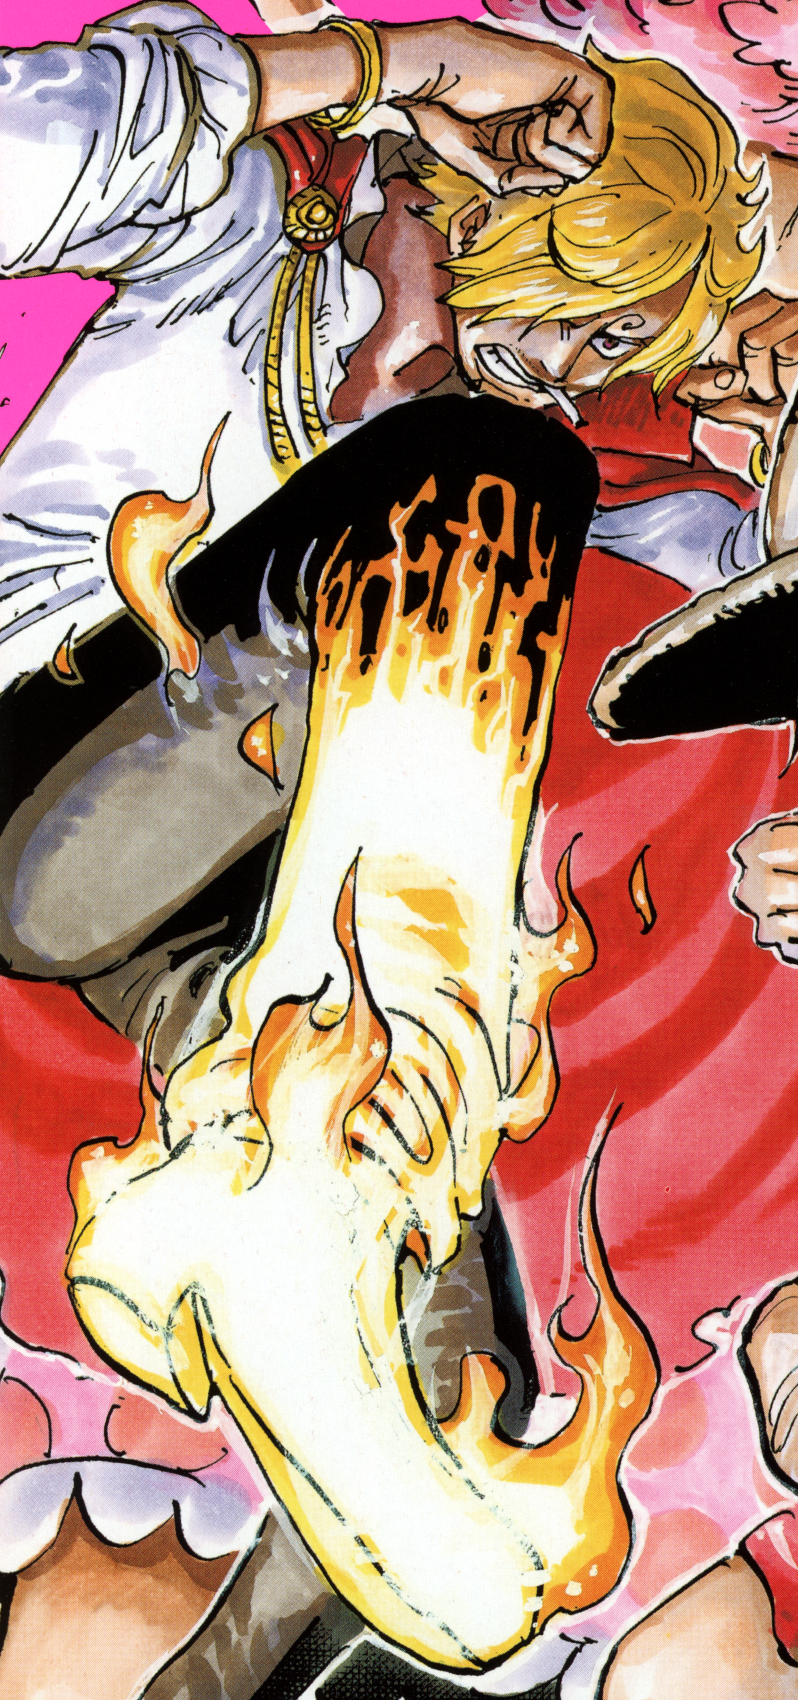 One Piece Chapter 1058 spoilers see Sanji kicked from Monster Trio based on  bounties